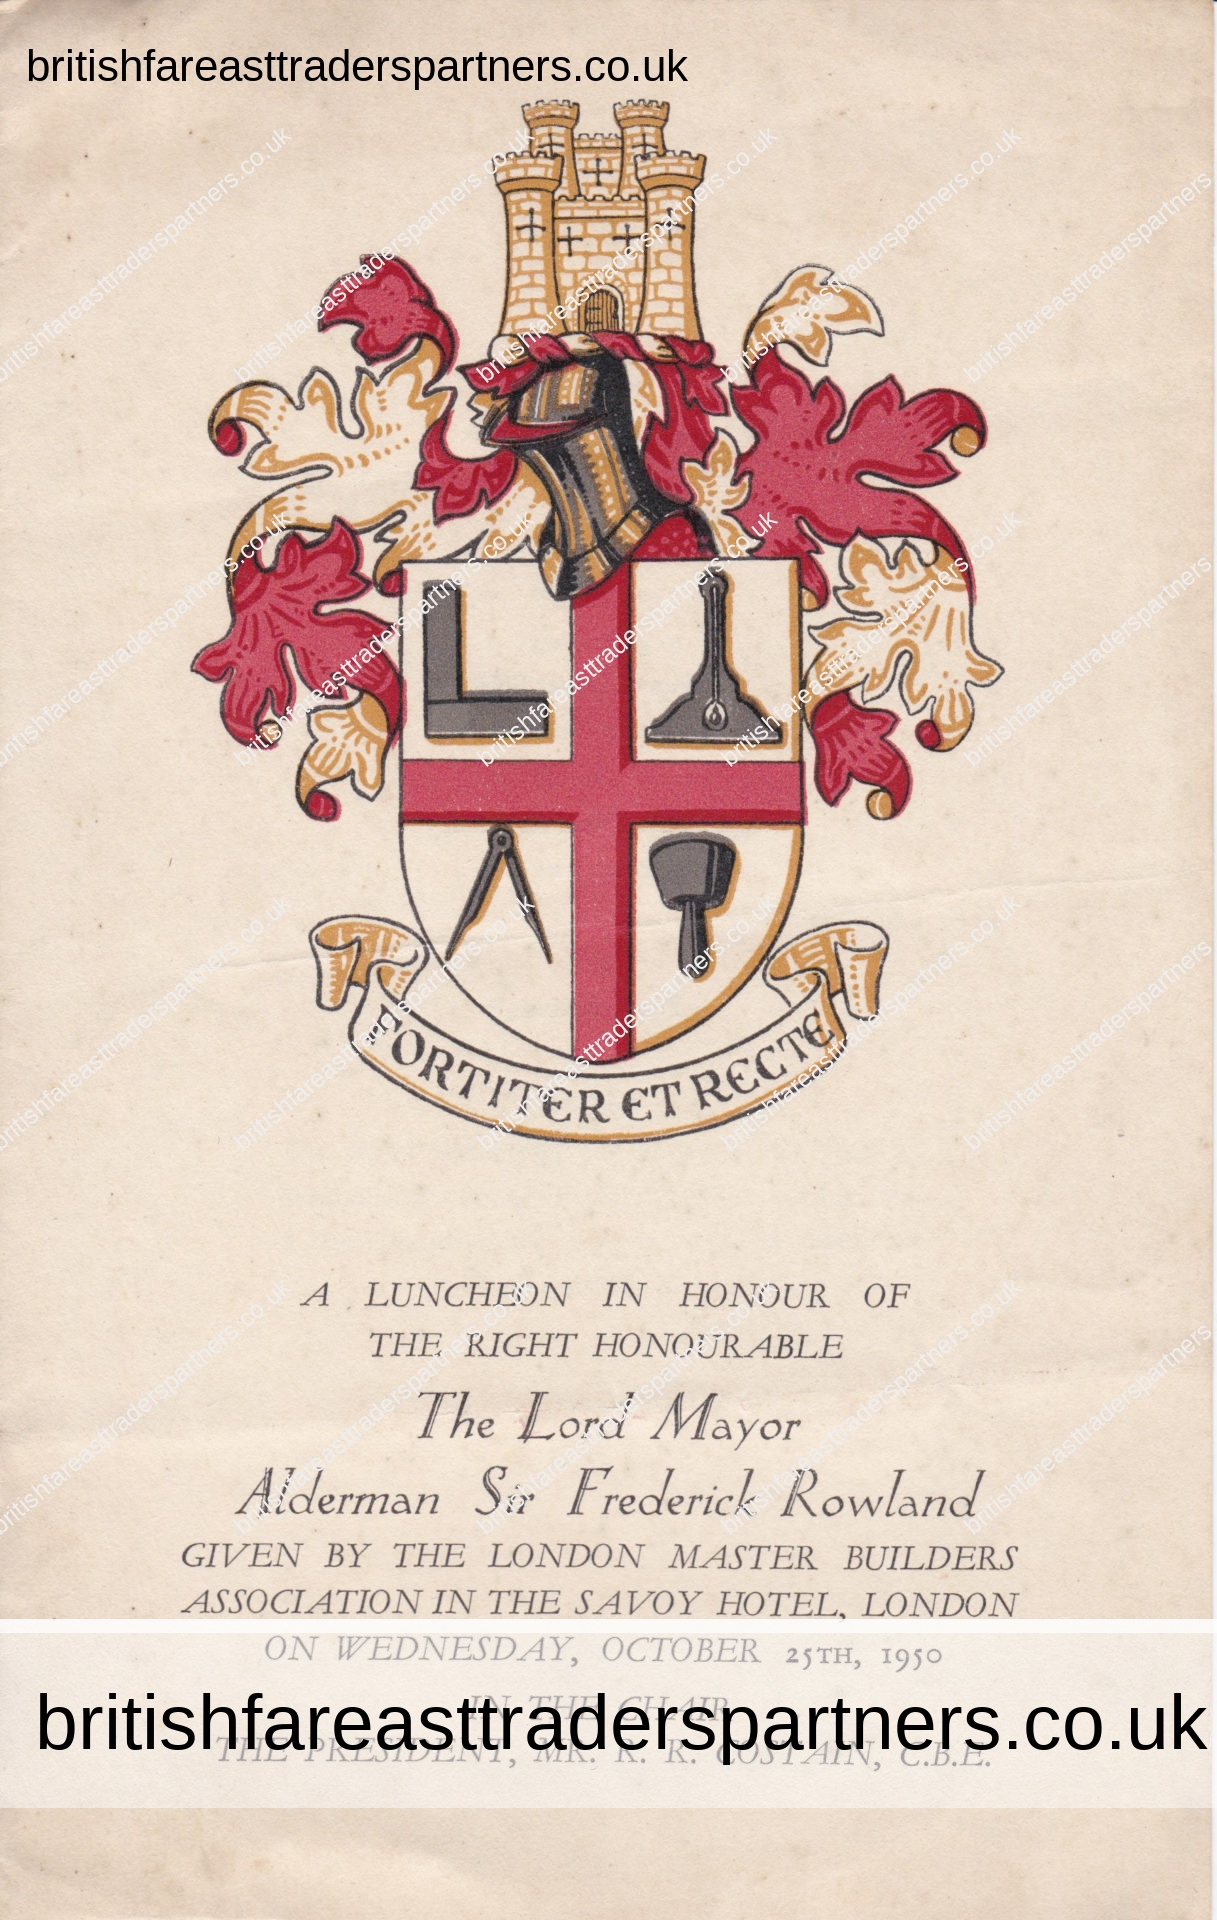 VINTAGE 1950 PROGRAMME “A LUNCHEON IN HONOUR OF THE RIGHT HONOURABLE THE LORD MAYOR ALDERMAN SIR FREDERICK ROWLAND” LONDON MASTER BUILDERS ASSOCIATION SAVOY HOTEL LONDON COLLECTABLES | PROGRAMMES | LONDON |  BRITISH | SOCIETY |  CULTURE | HERITAGE | LIFESTYLE